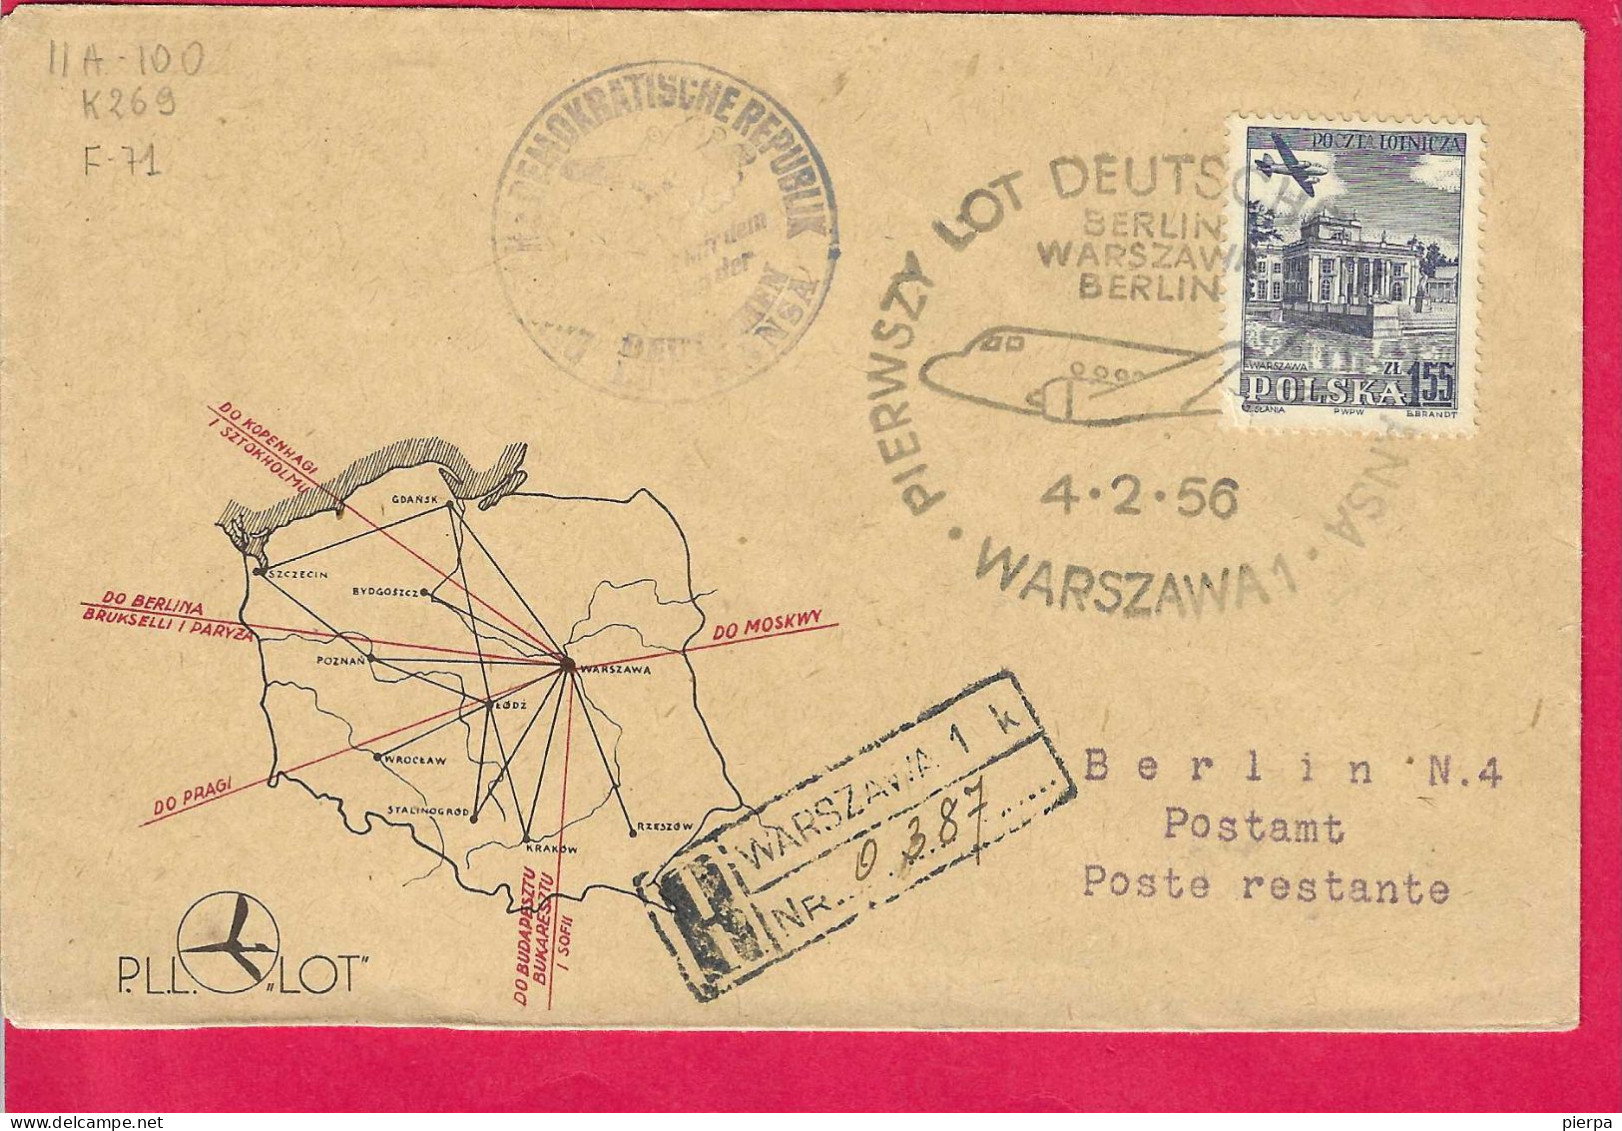 POLAND - LOT FLIGHT BERLIN/WARSZAWA/BERLIN *4.2.56* ON OFFICIAL COVER - Airplanes